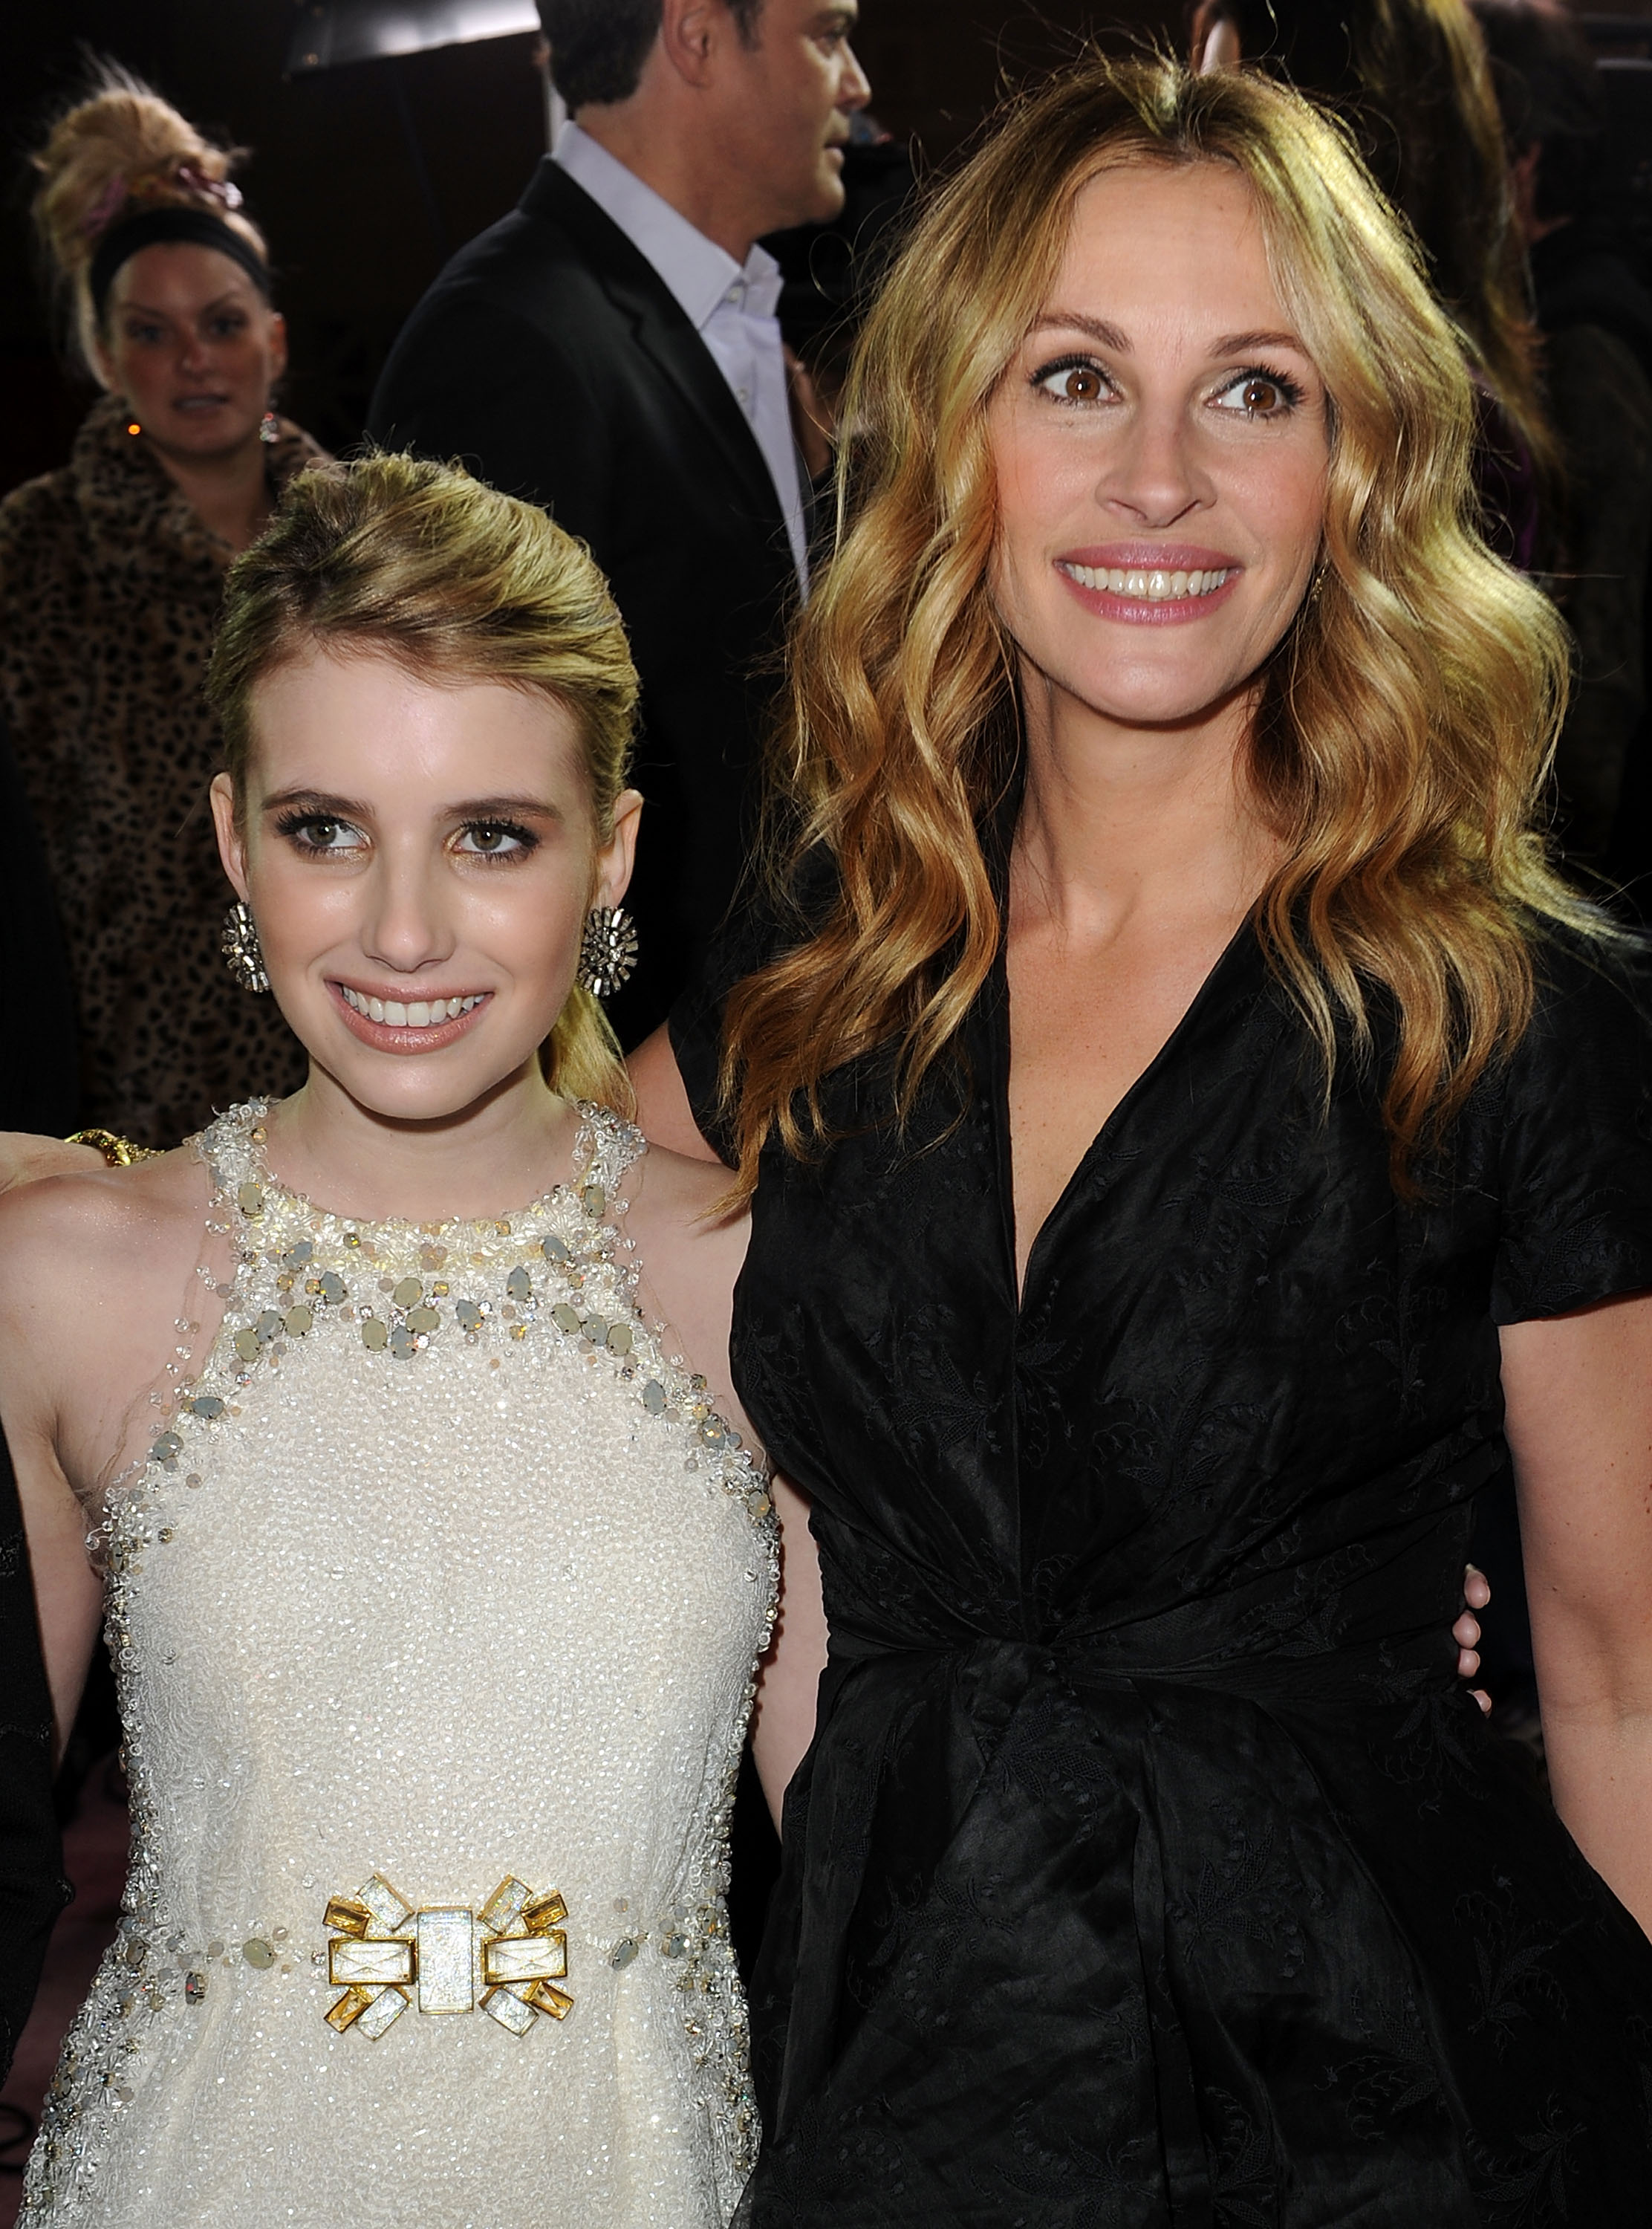 Emma and Julia Roberts at the premiere of "Valentine's Day" in Los Angeles, California on February 8, 2010 | Source: Getty Images